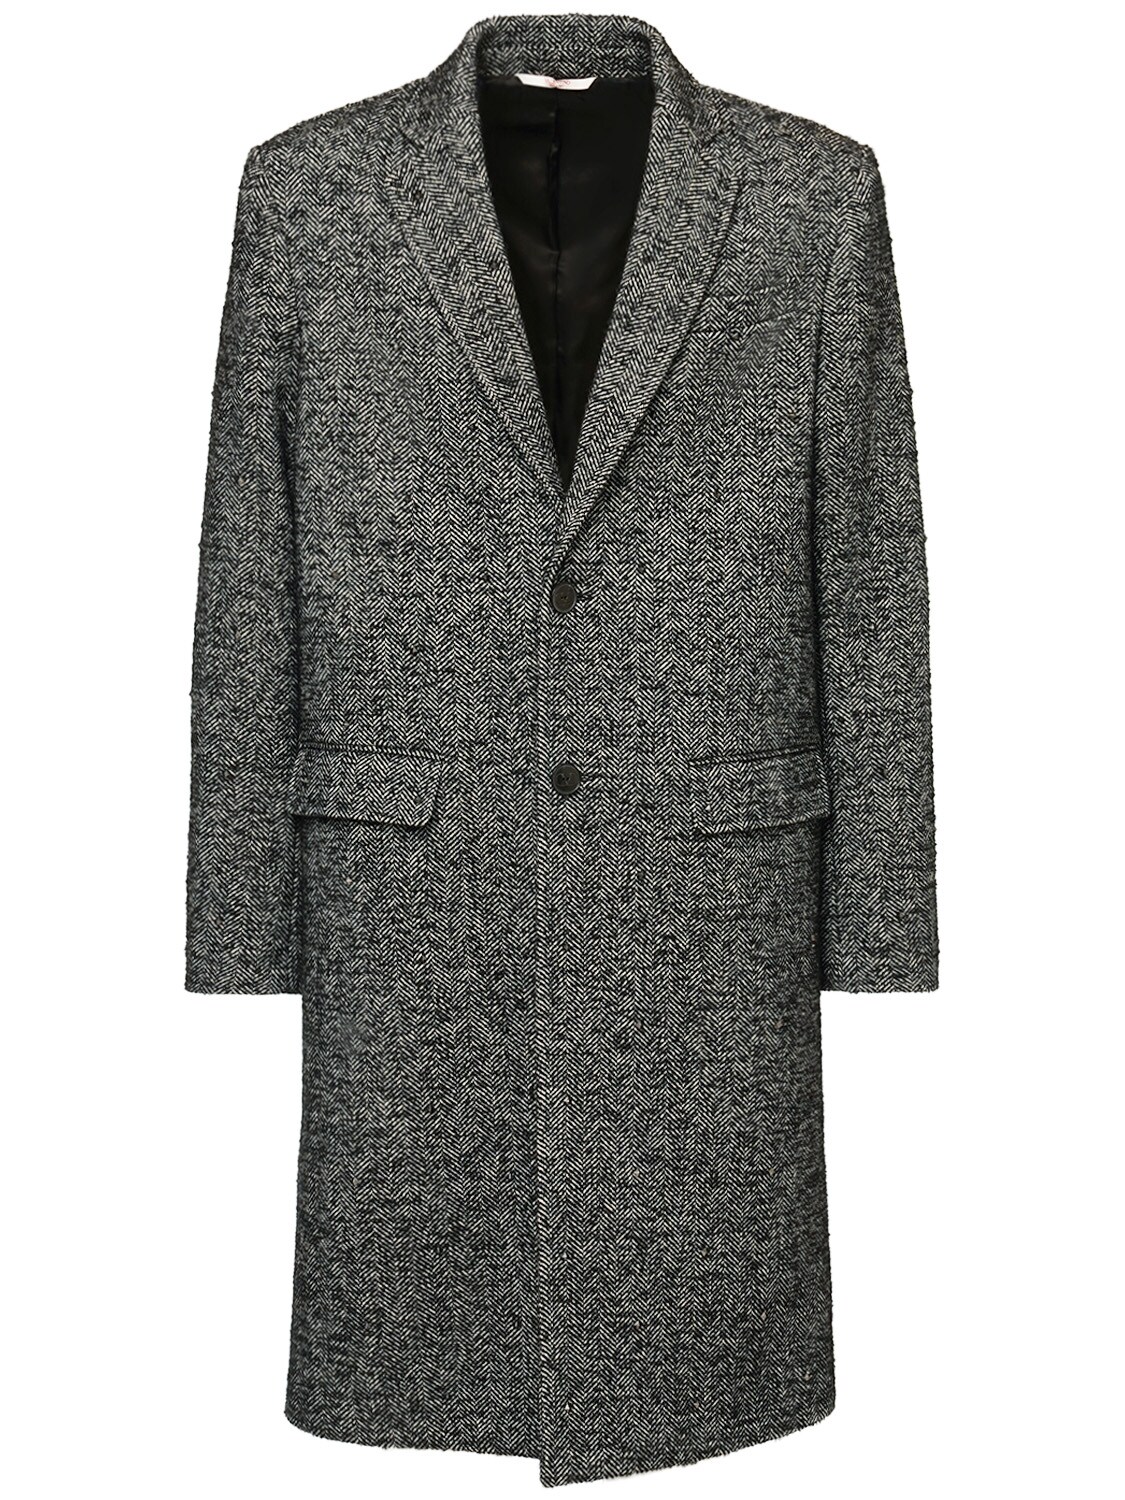 VALENTINO Wool Blend Houndstooth Coat